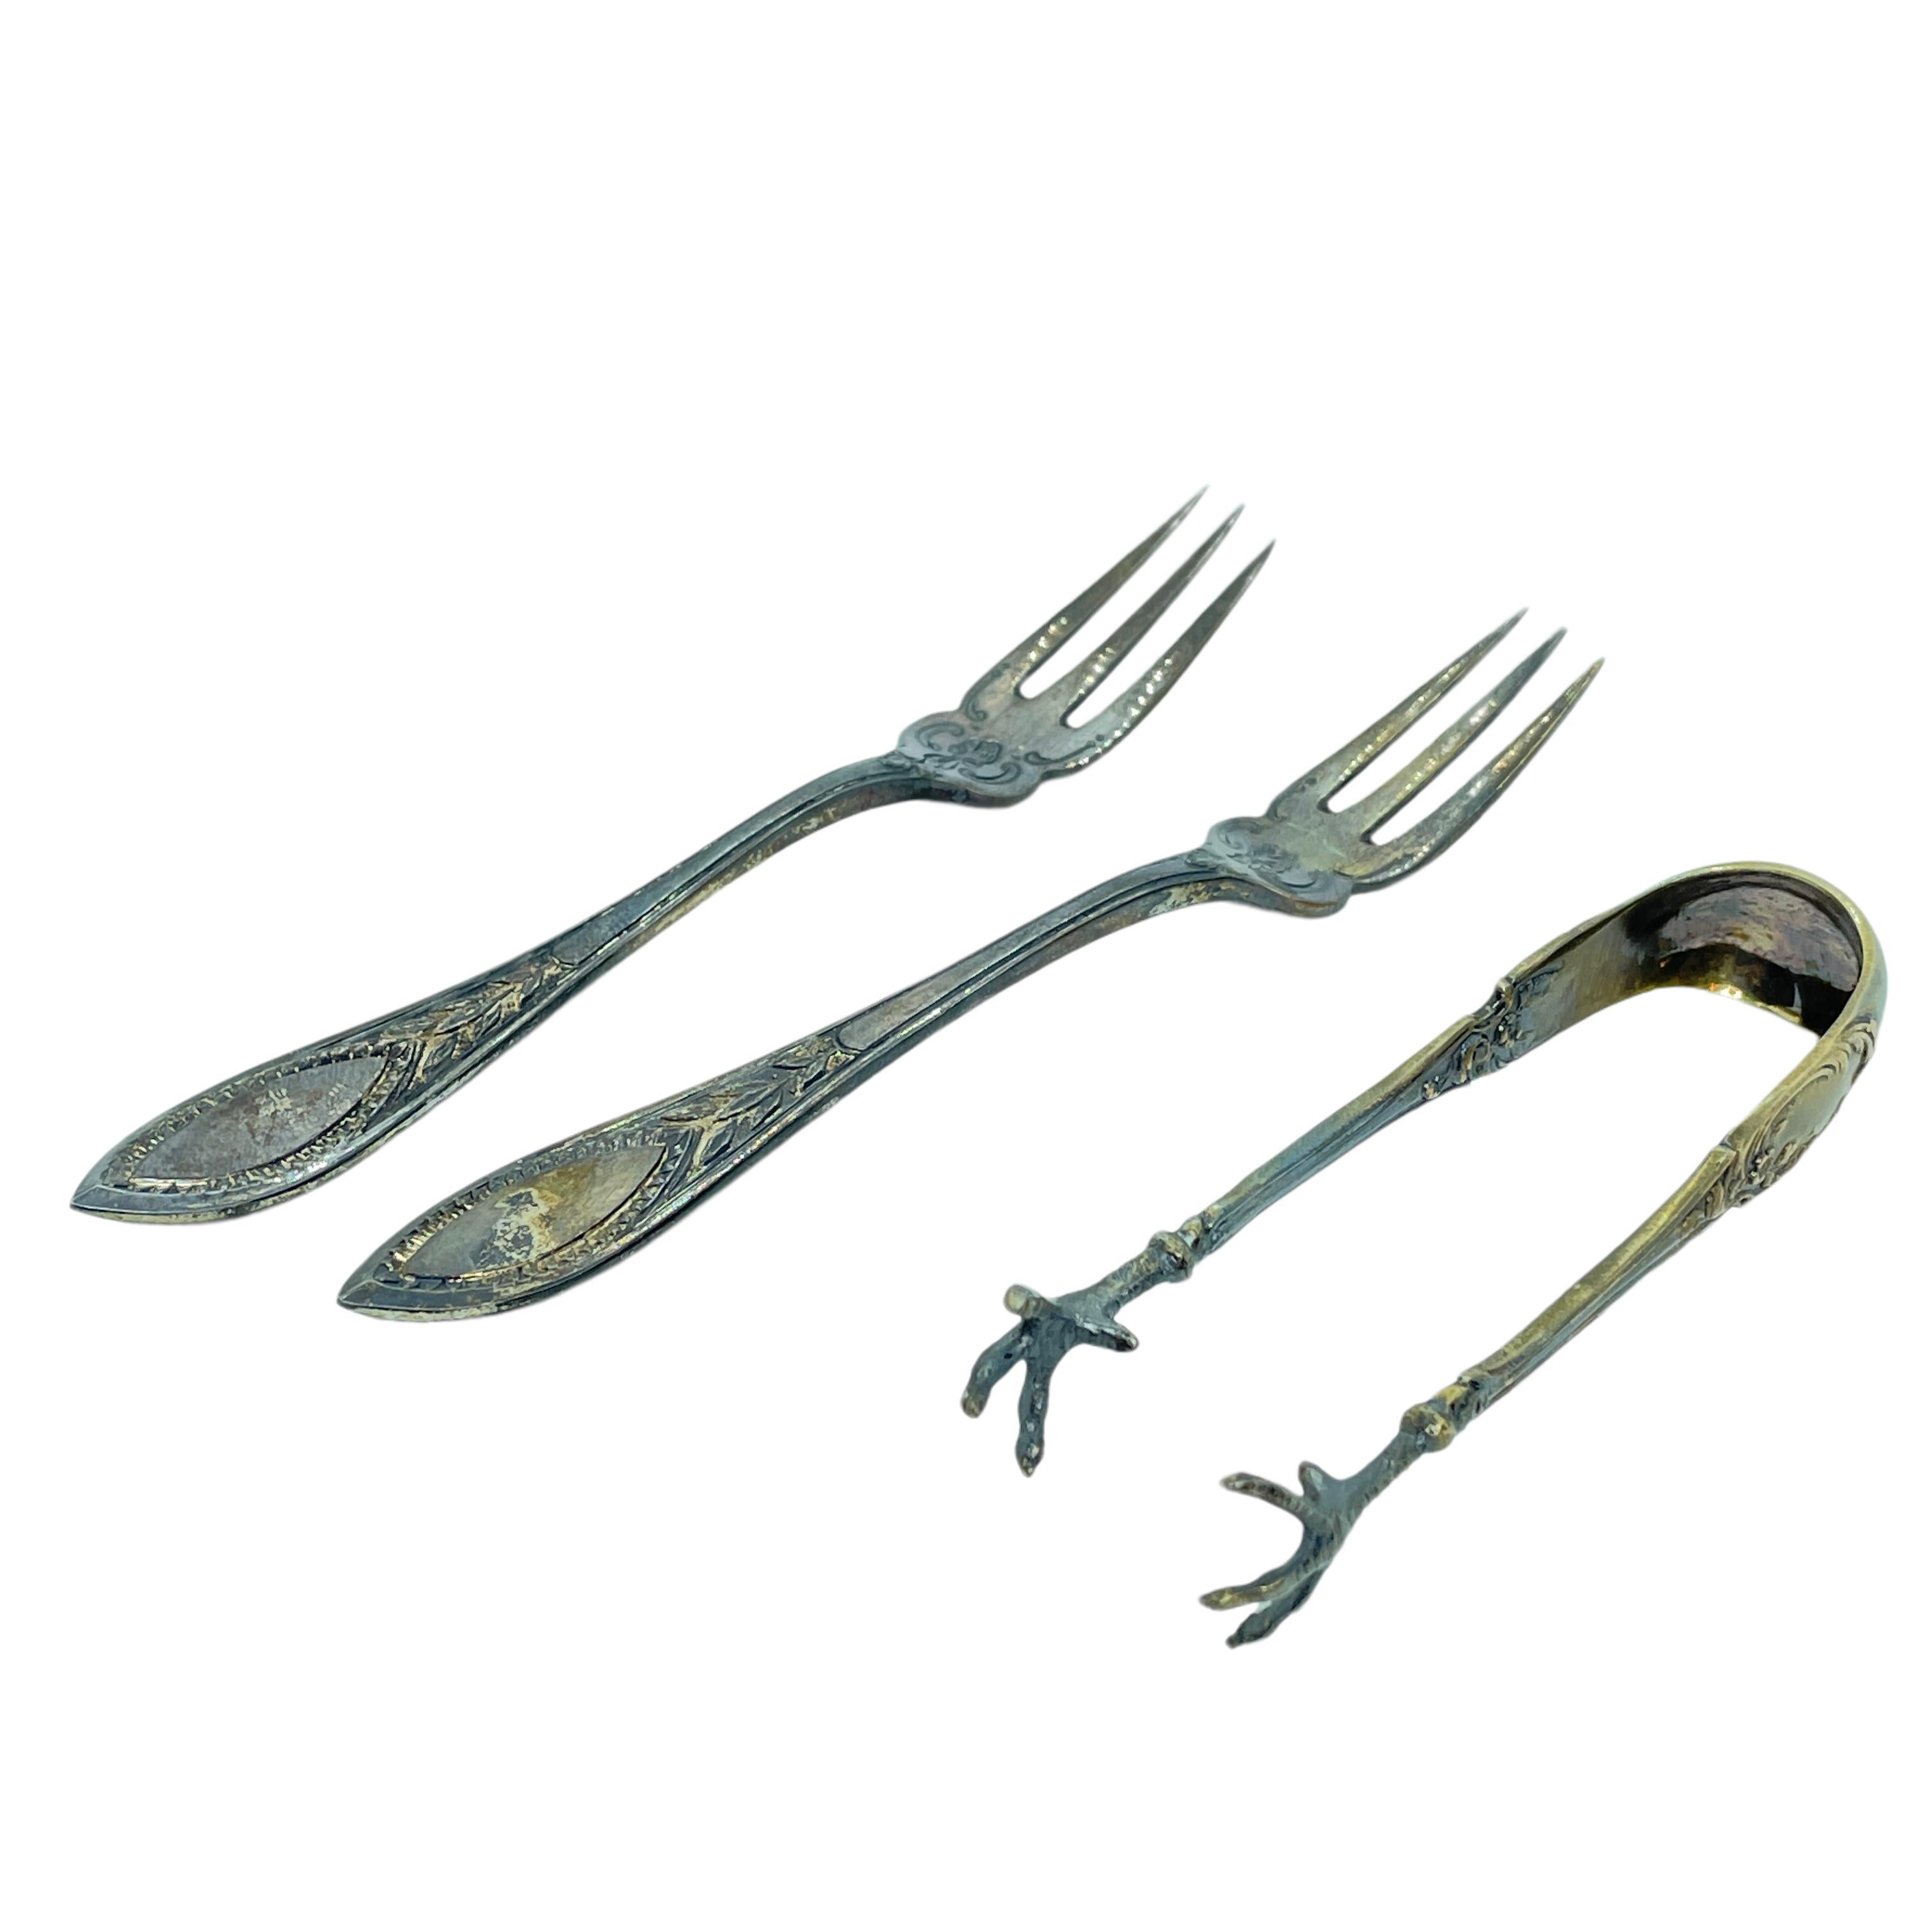 A pair of beautiful Art Nouveau fruit forks and a sugar tong. These serving pieces are in a rare and antique design, made by a manufacturer in Leipzig Germany. Made of 800 coin silver, it will make a nice addition to any table. The Weight of the